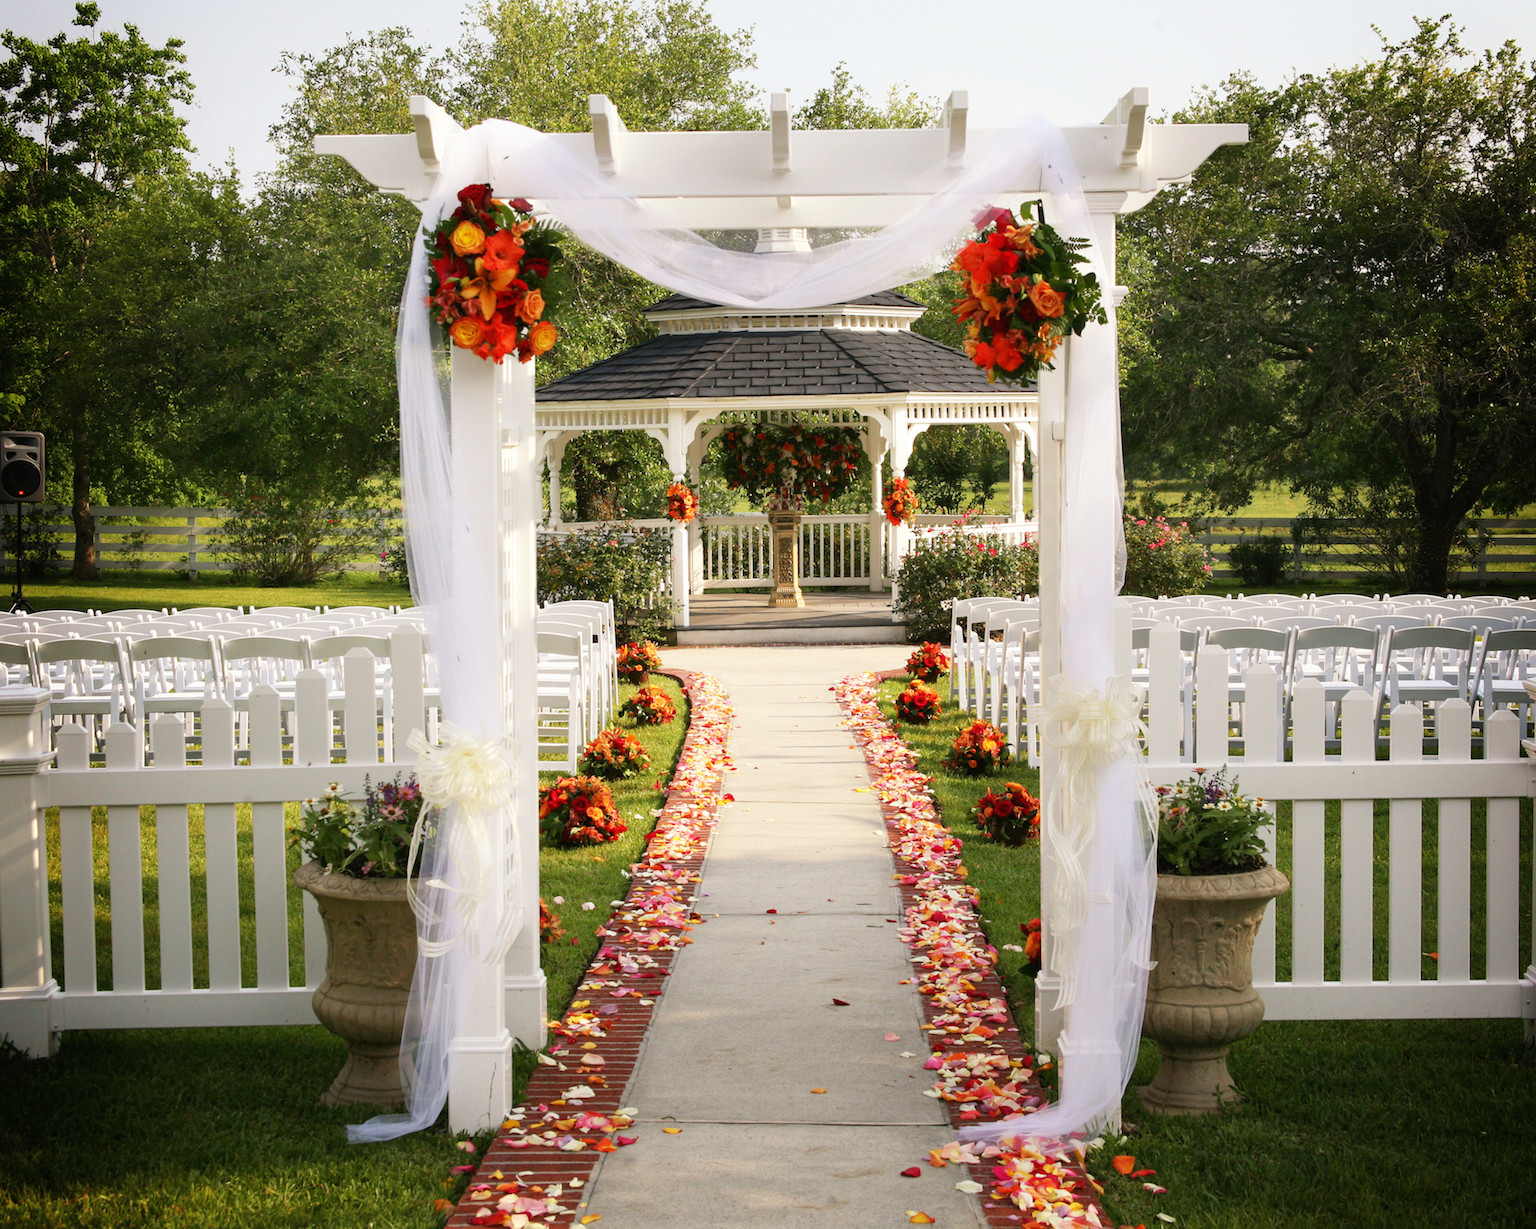 How To Decorate For A Wedding
 35 Outdoor Wedding Decoration Ideas